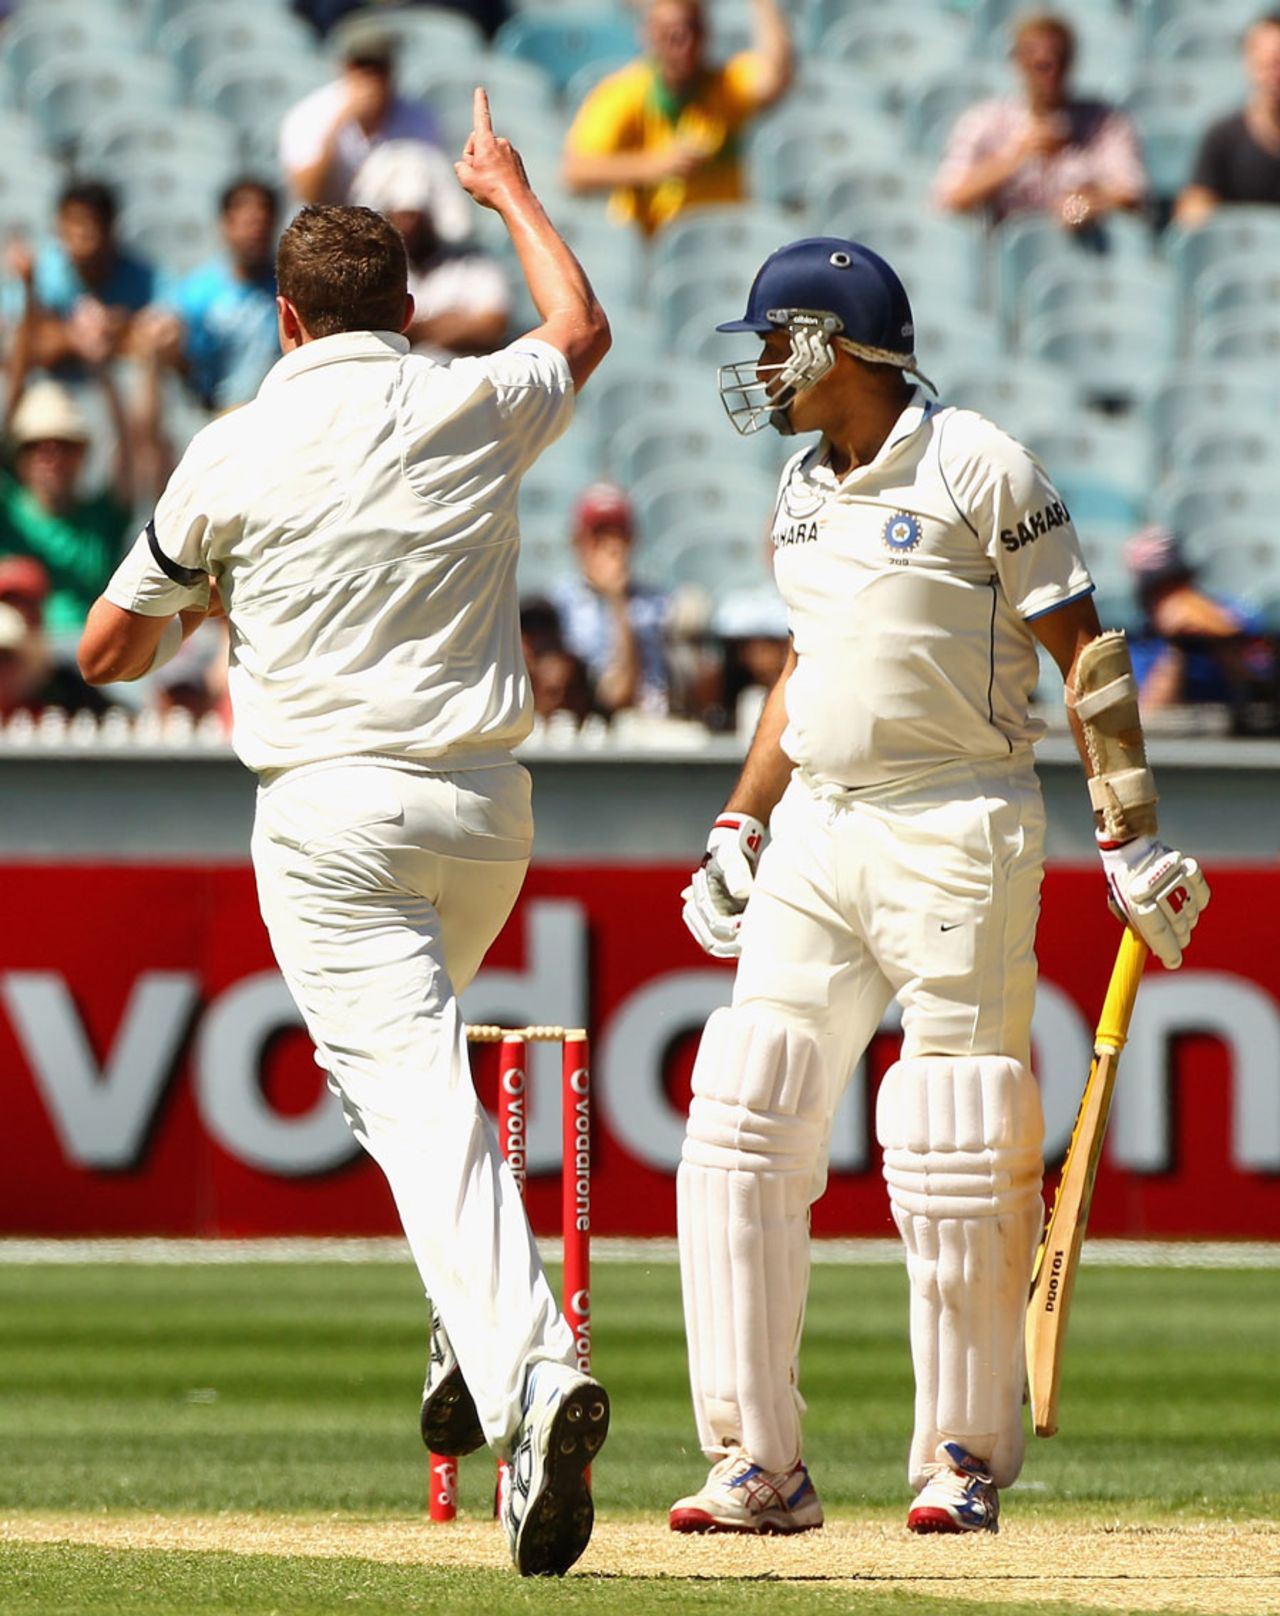 Peter Siddle had VVS Laxman caught behind cheaply, Australia v India, 1st Test, Melbourne, 3rd day, December 28, 2011